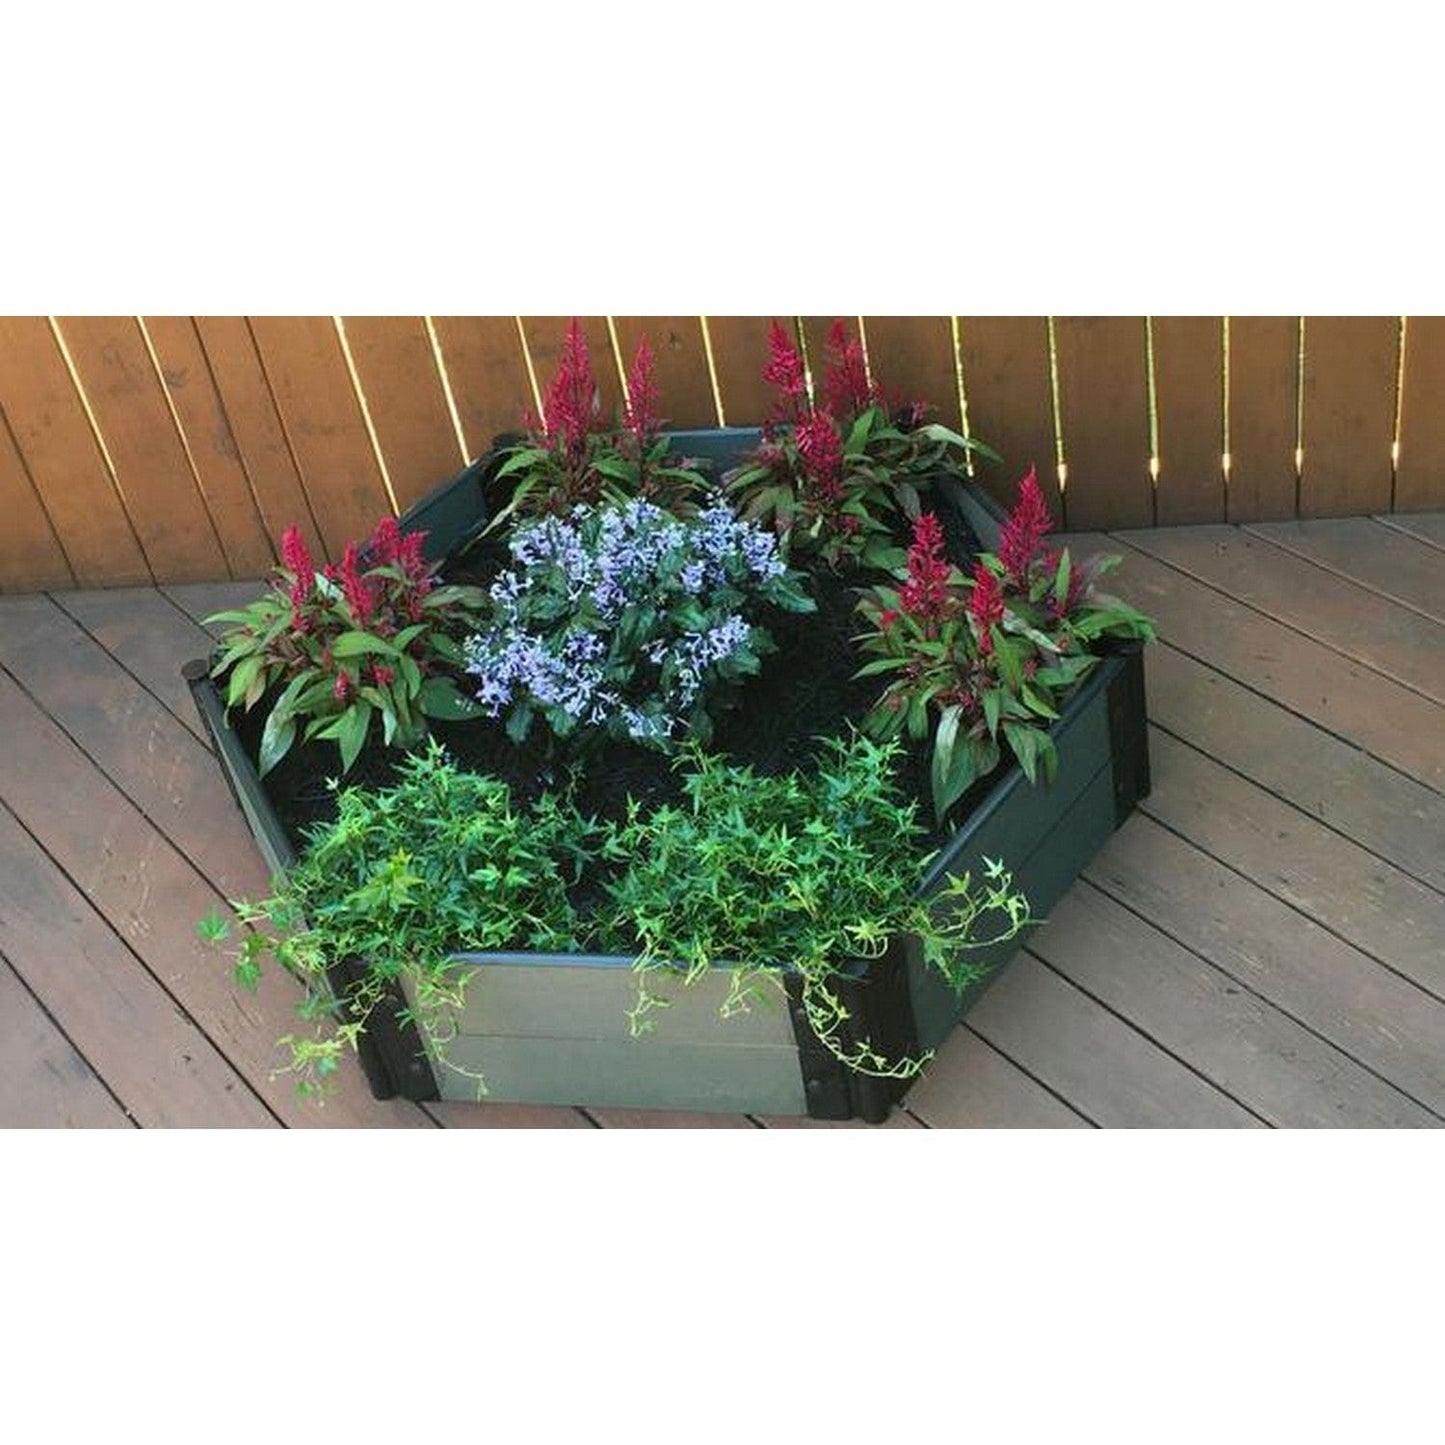 Frame It All Gardening Accessories Frame It All | Tool-Free Fort Jefferson Raised Garden Bed (Hexagon) 4' X 4' X 16.5" - Uptown Brown - 1" Profile 200003469